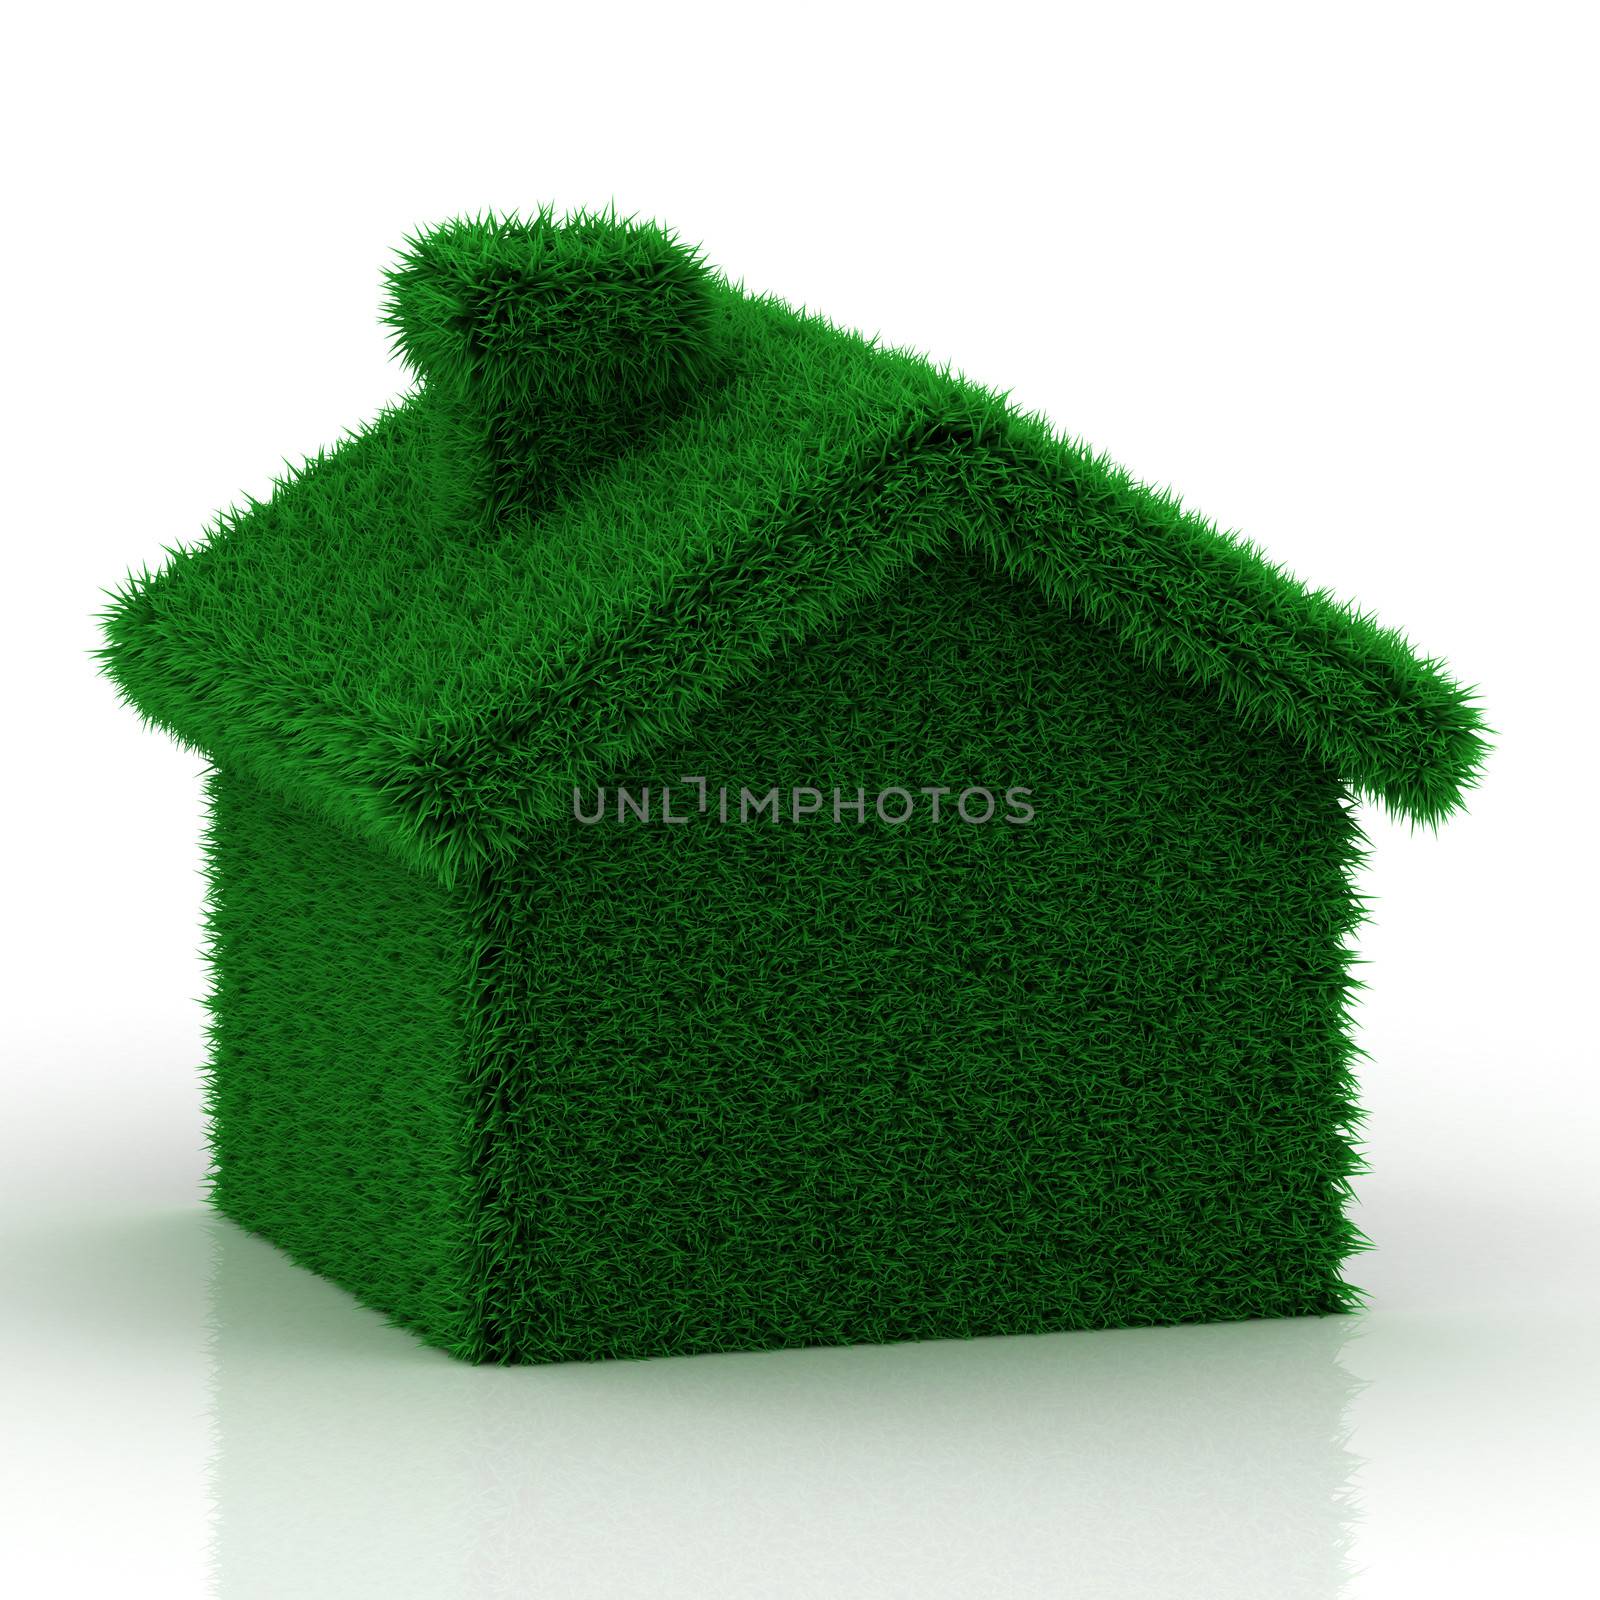 eco grass house on a white background